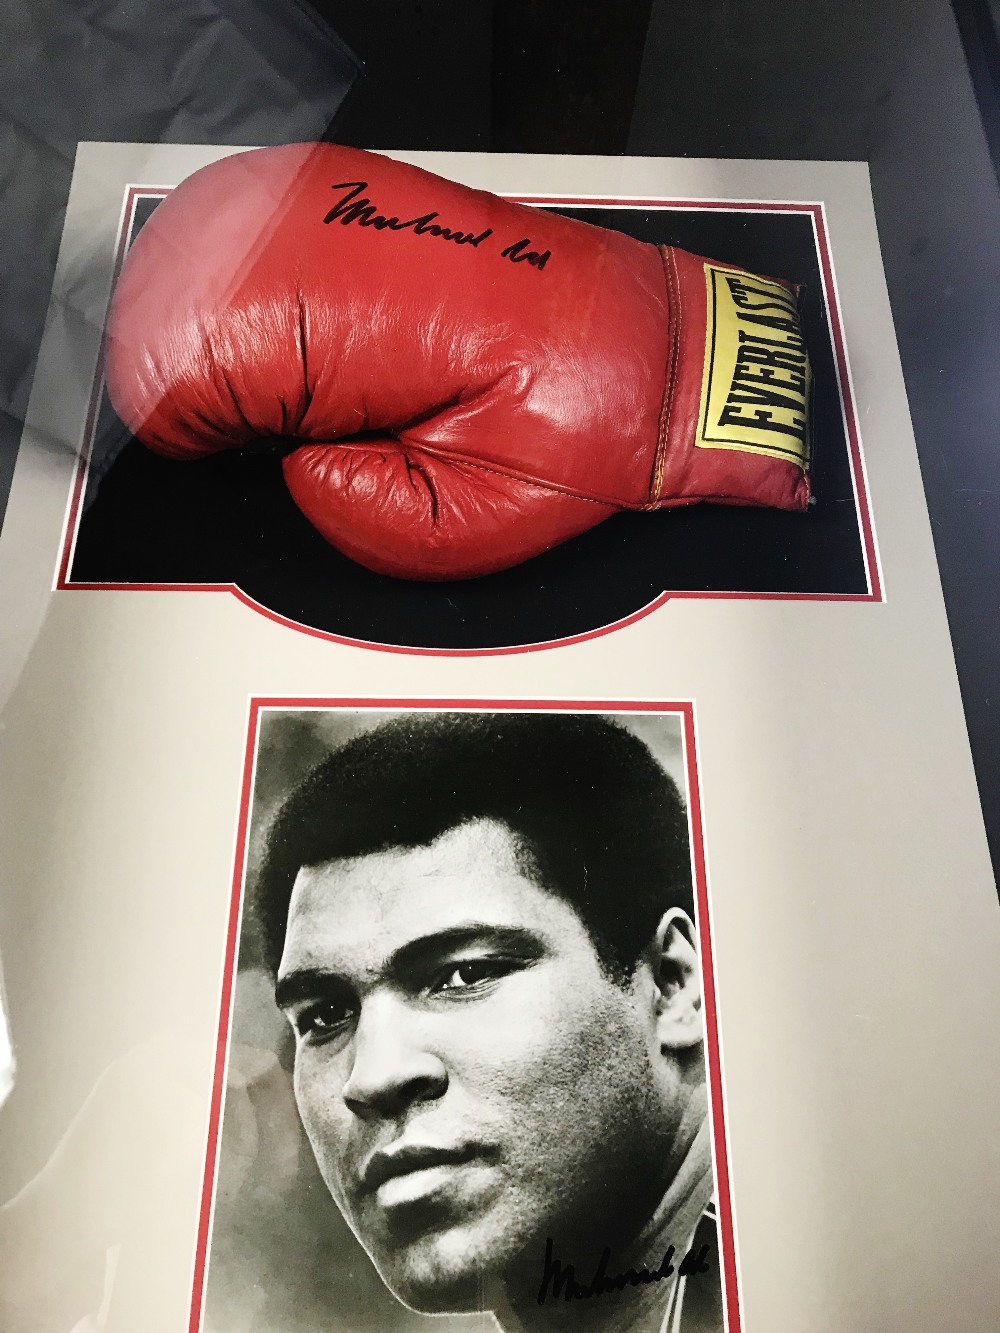 Muhammad Ali Signed Everlast Boxing Glove & Signed Picture - Image 2 of 4